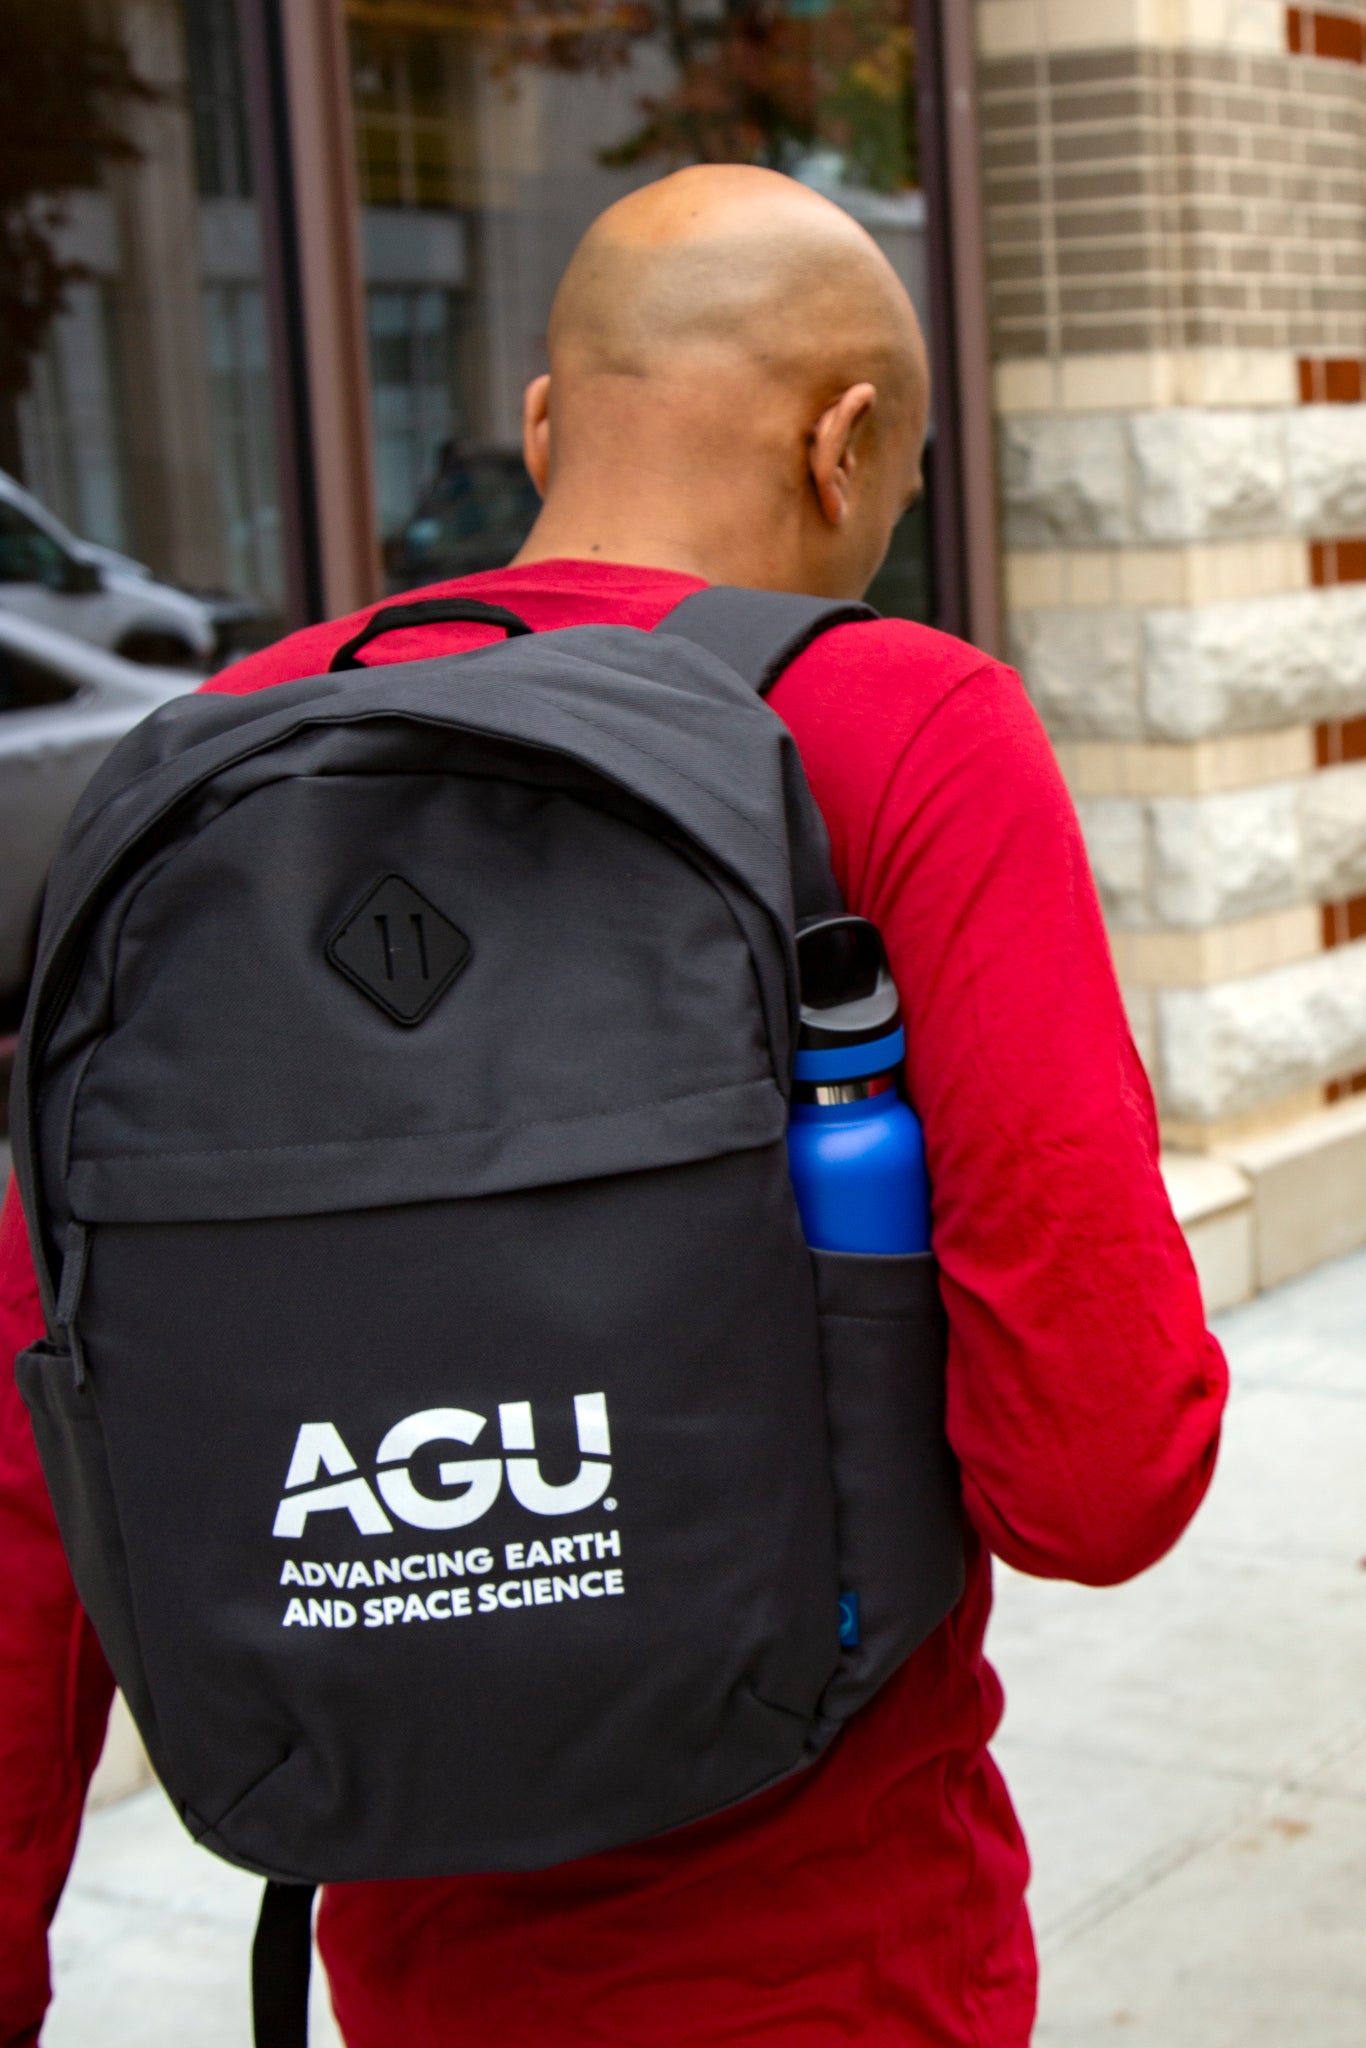 A man walks away from the camera, wearing a backpack with the AGU logo